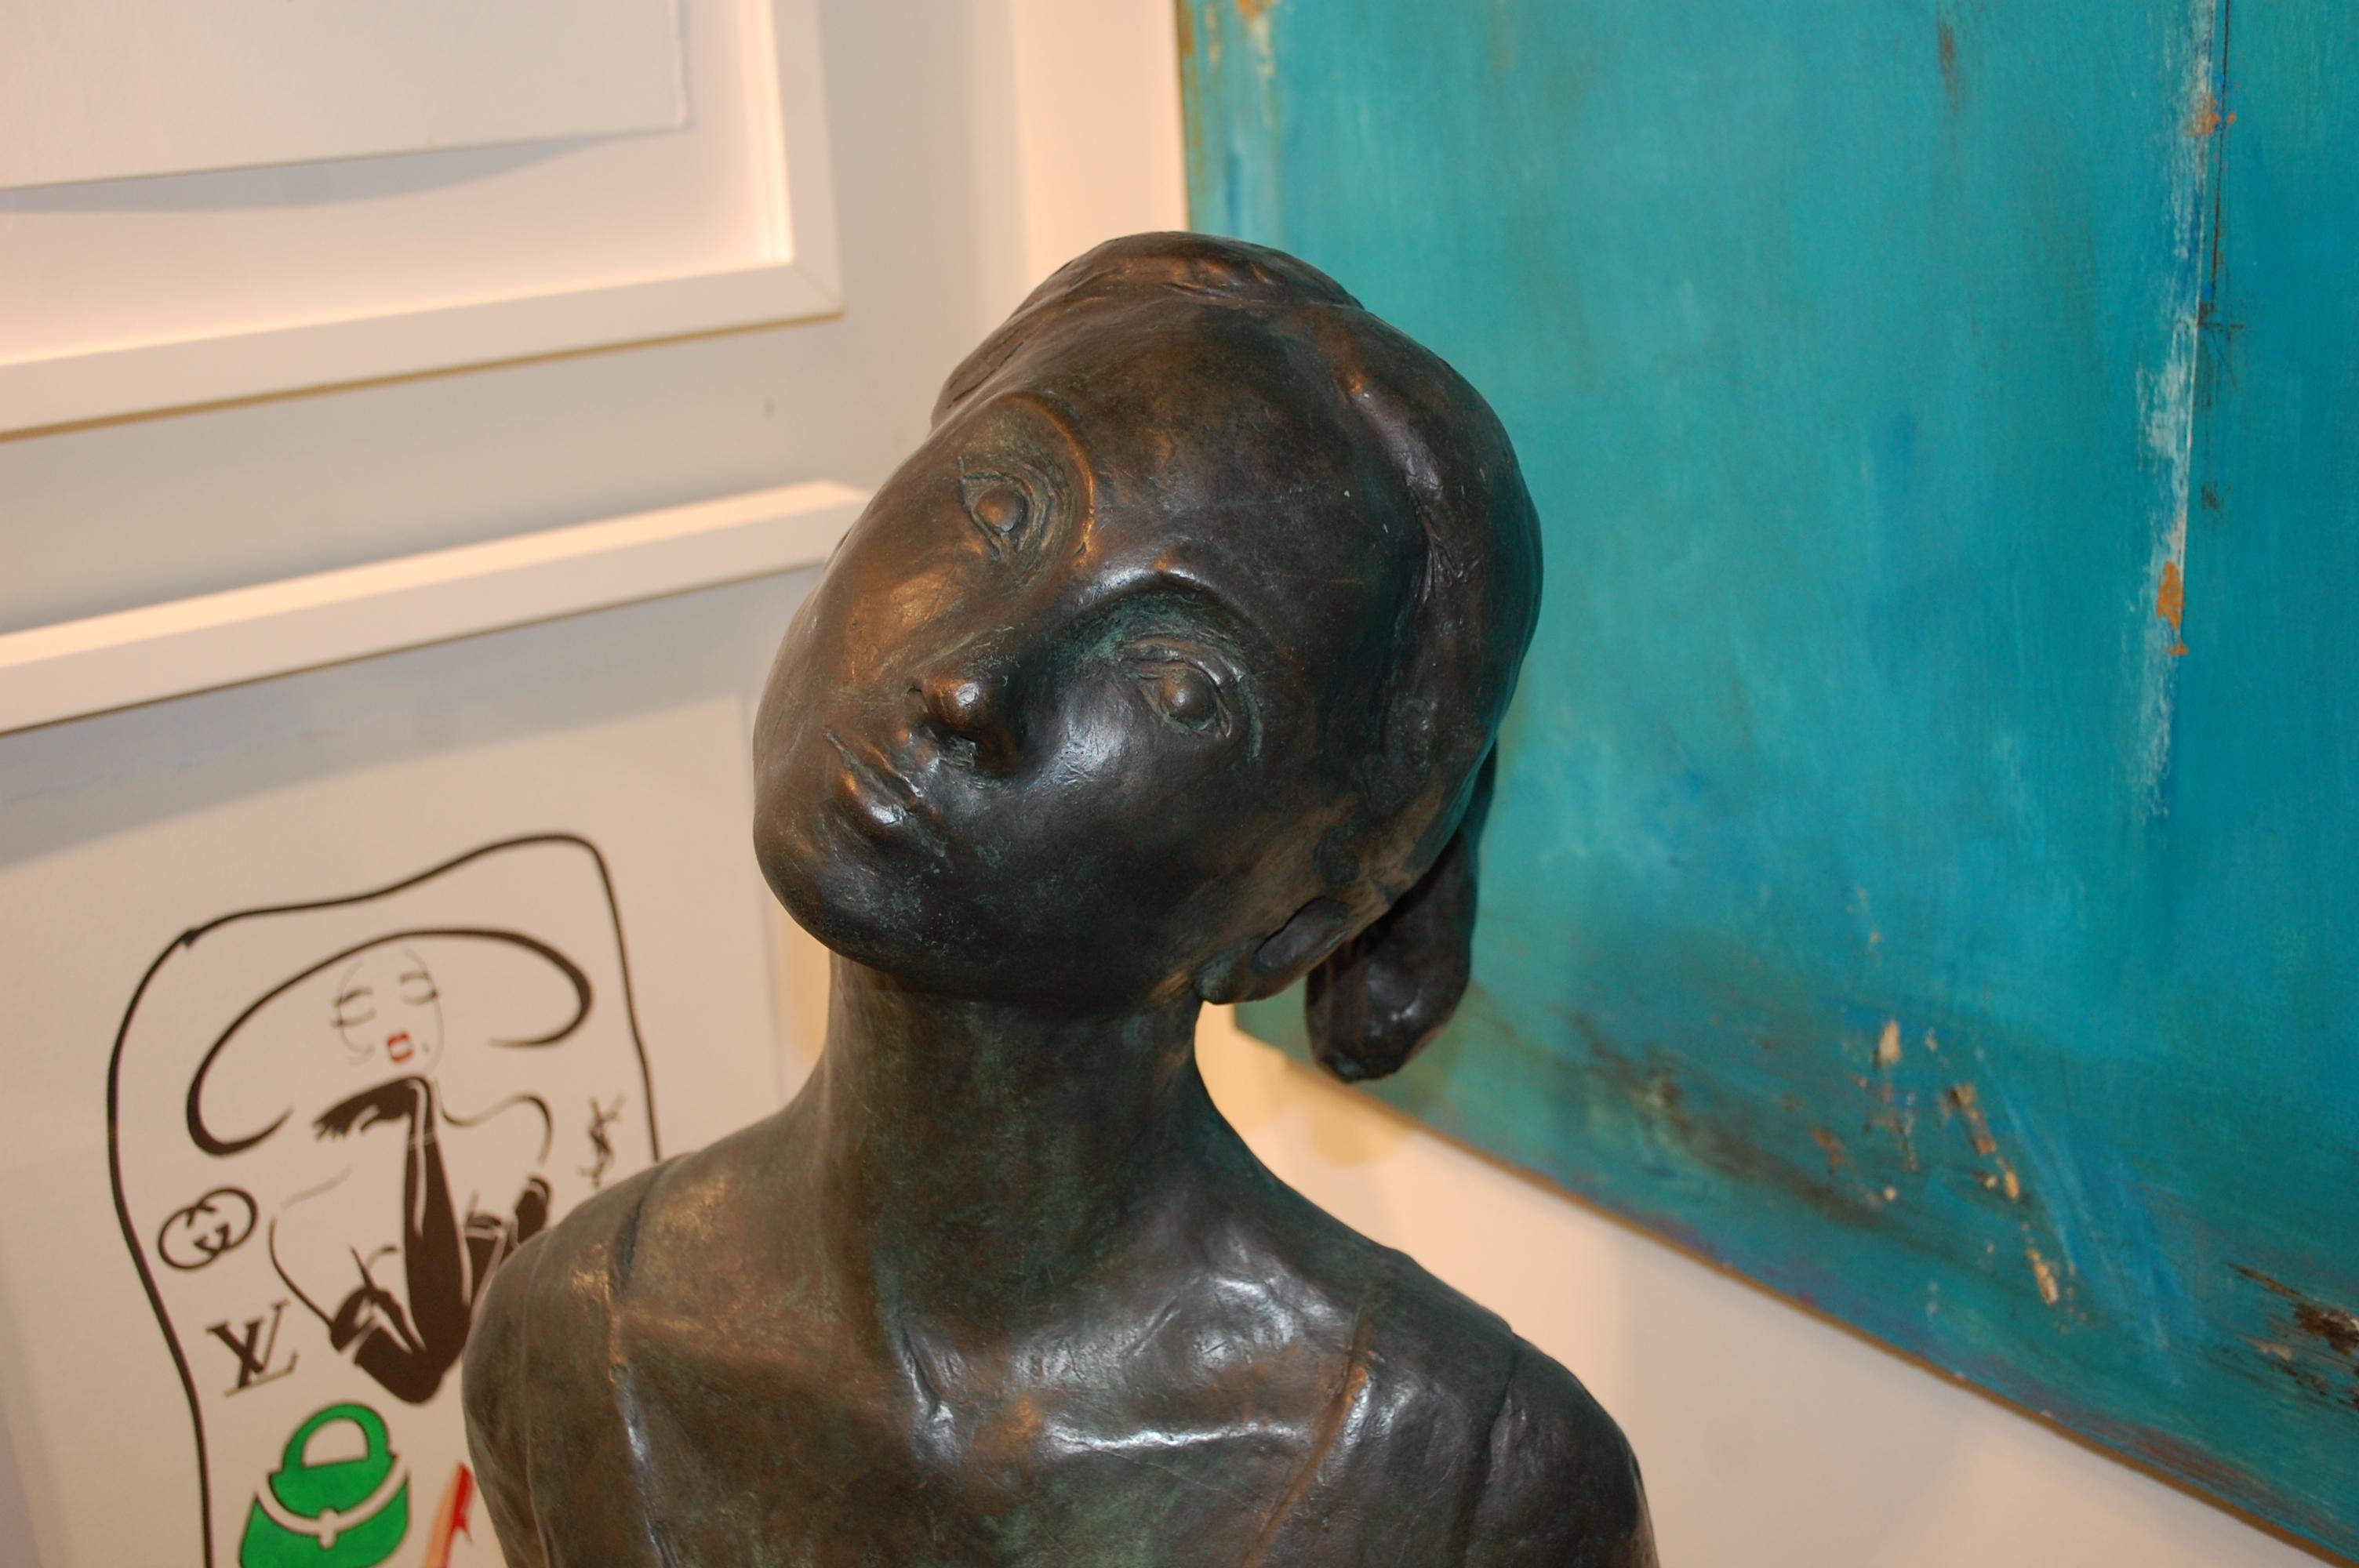 Bust Of A Young Woman 
Bronze sculpture signed by the artist inside the cast and dated 1988, 1st cast in London.

Kevin Berlin is an international artist best known for painting, sculpture, and performance. Berlin currently lives in Southampton, New